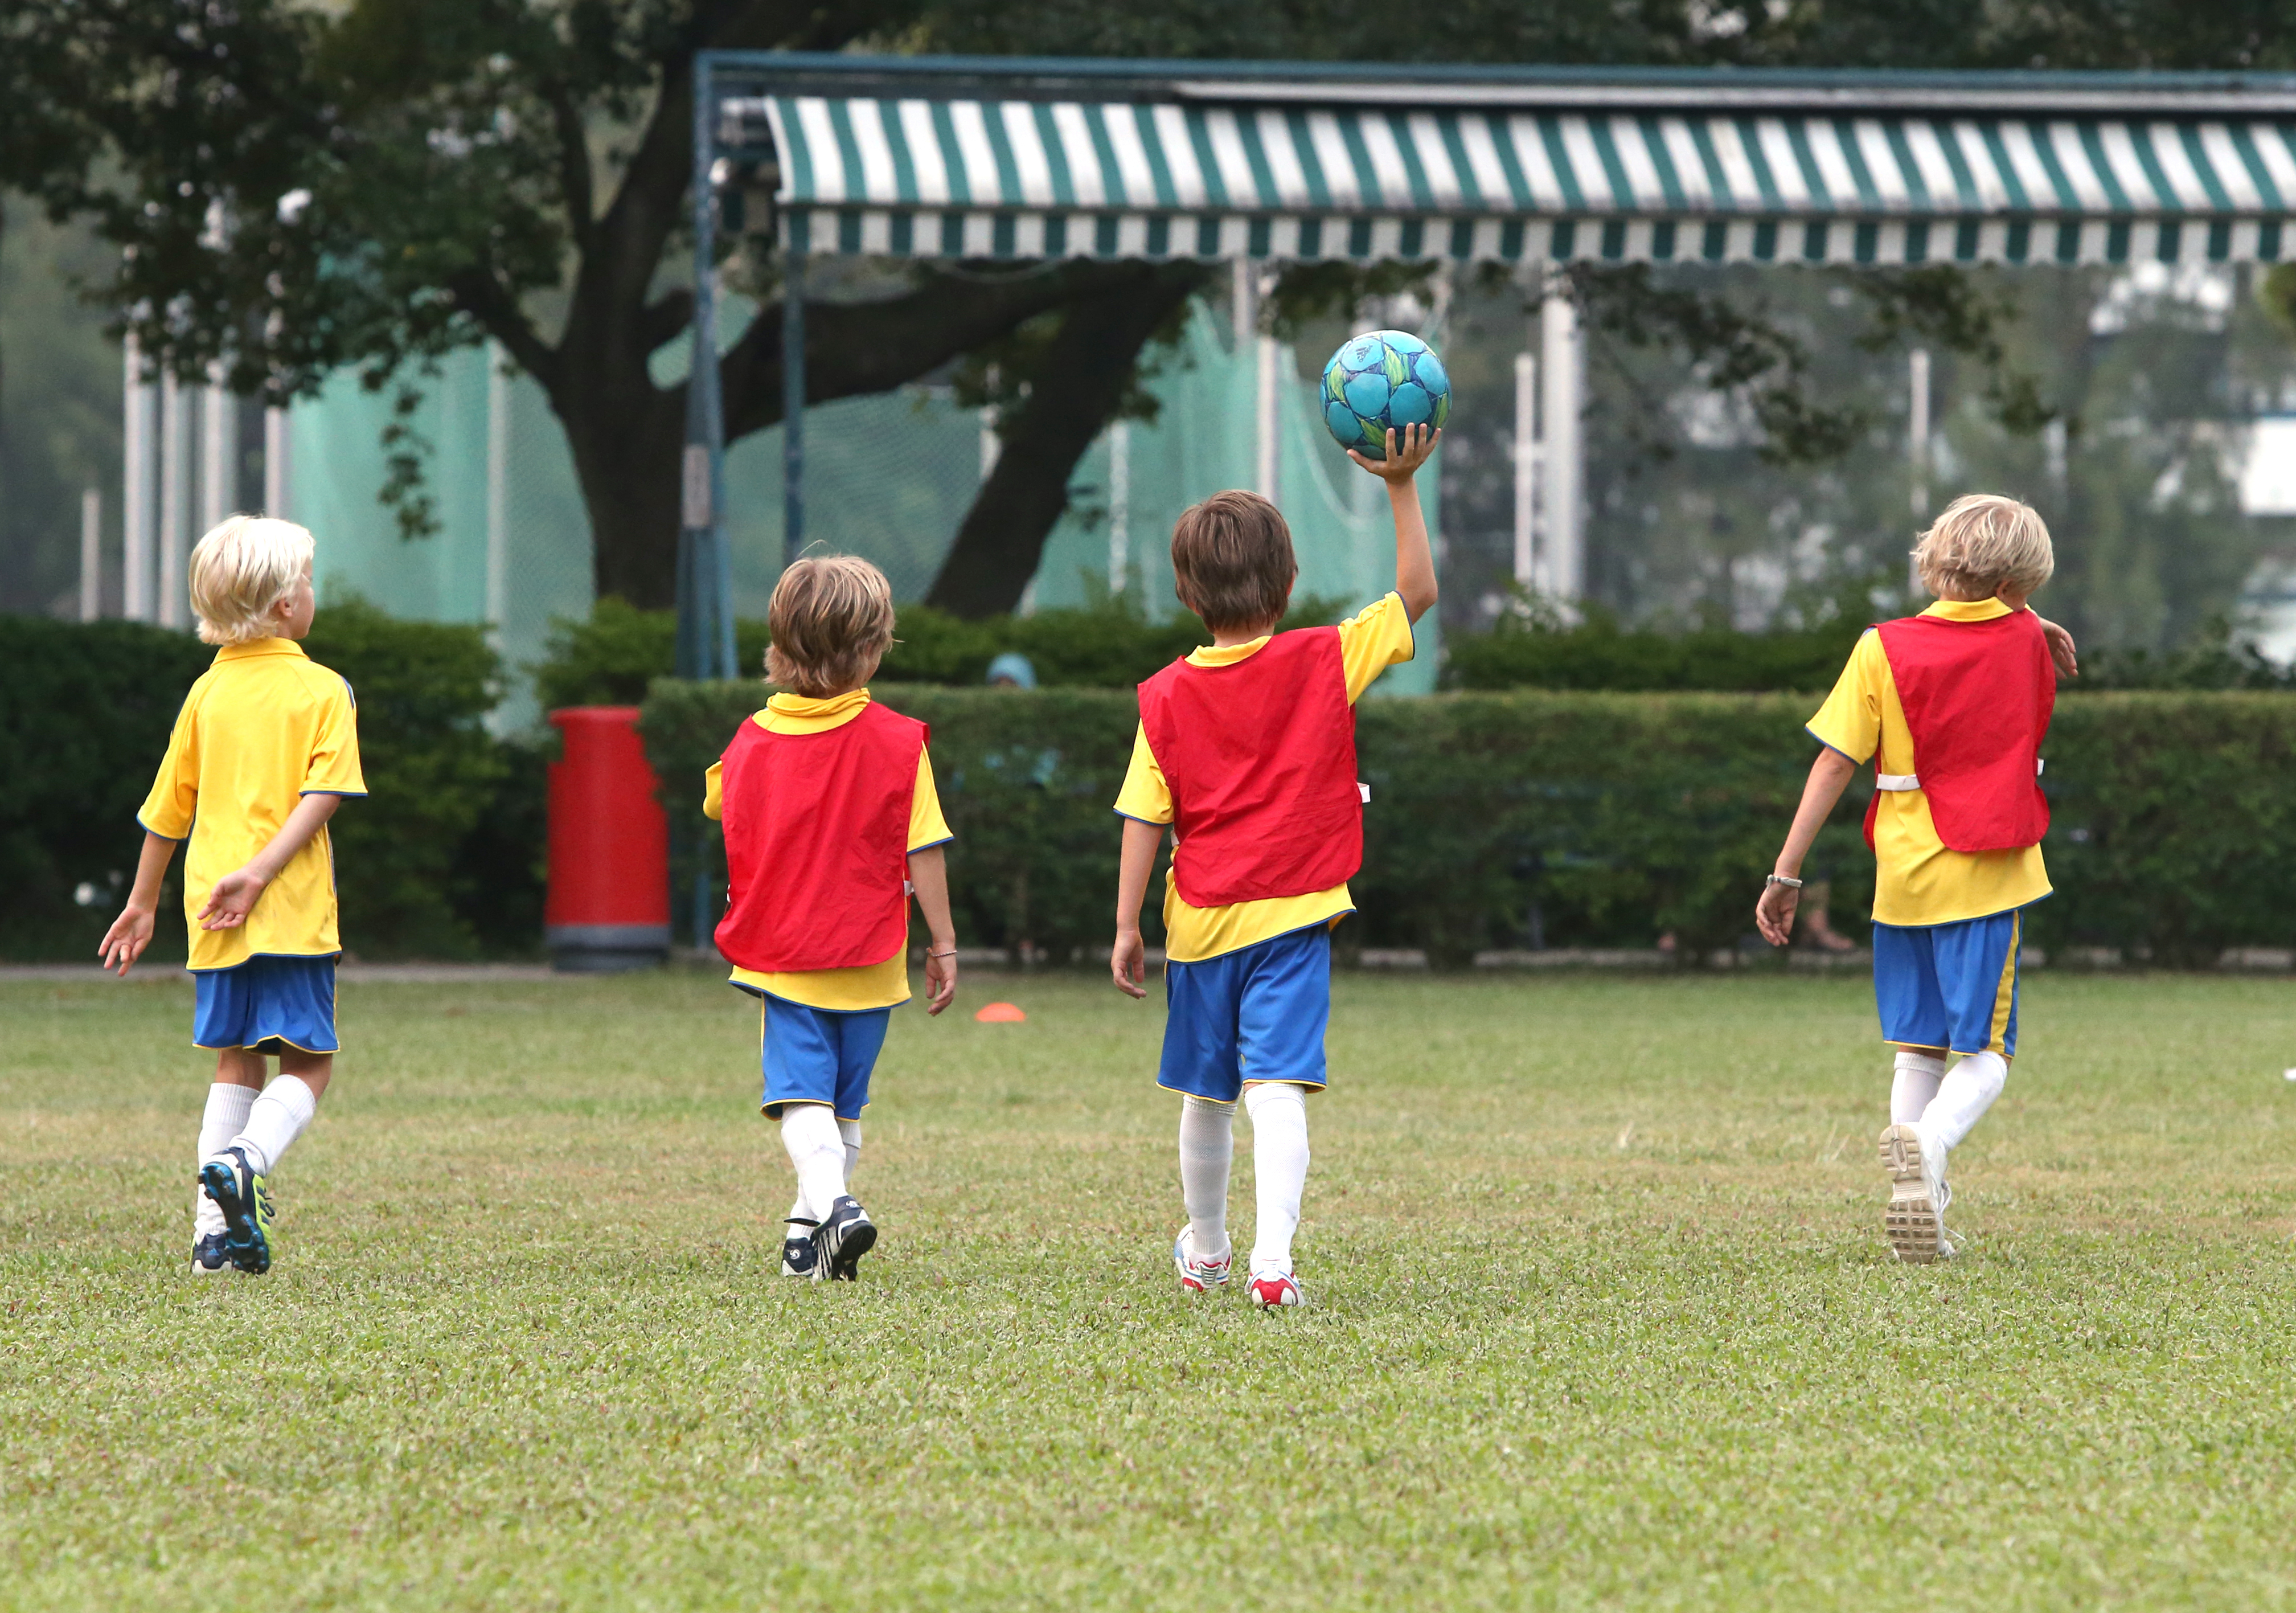 Children's training at Asia Pacific Soccer School at HKU Stanley Ho Sports Centre, Sandy Bay, Pok Fu Lam. Hong Kong. 18SEP12